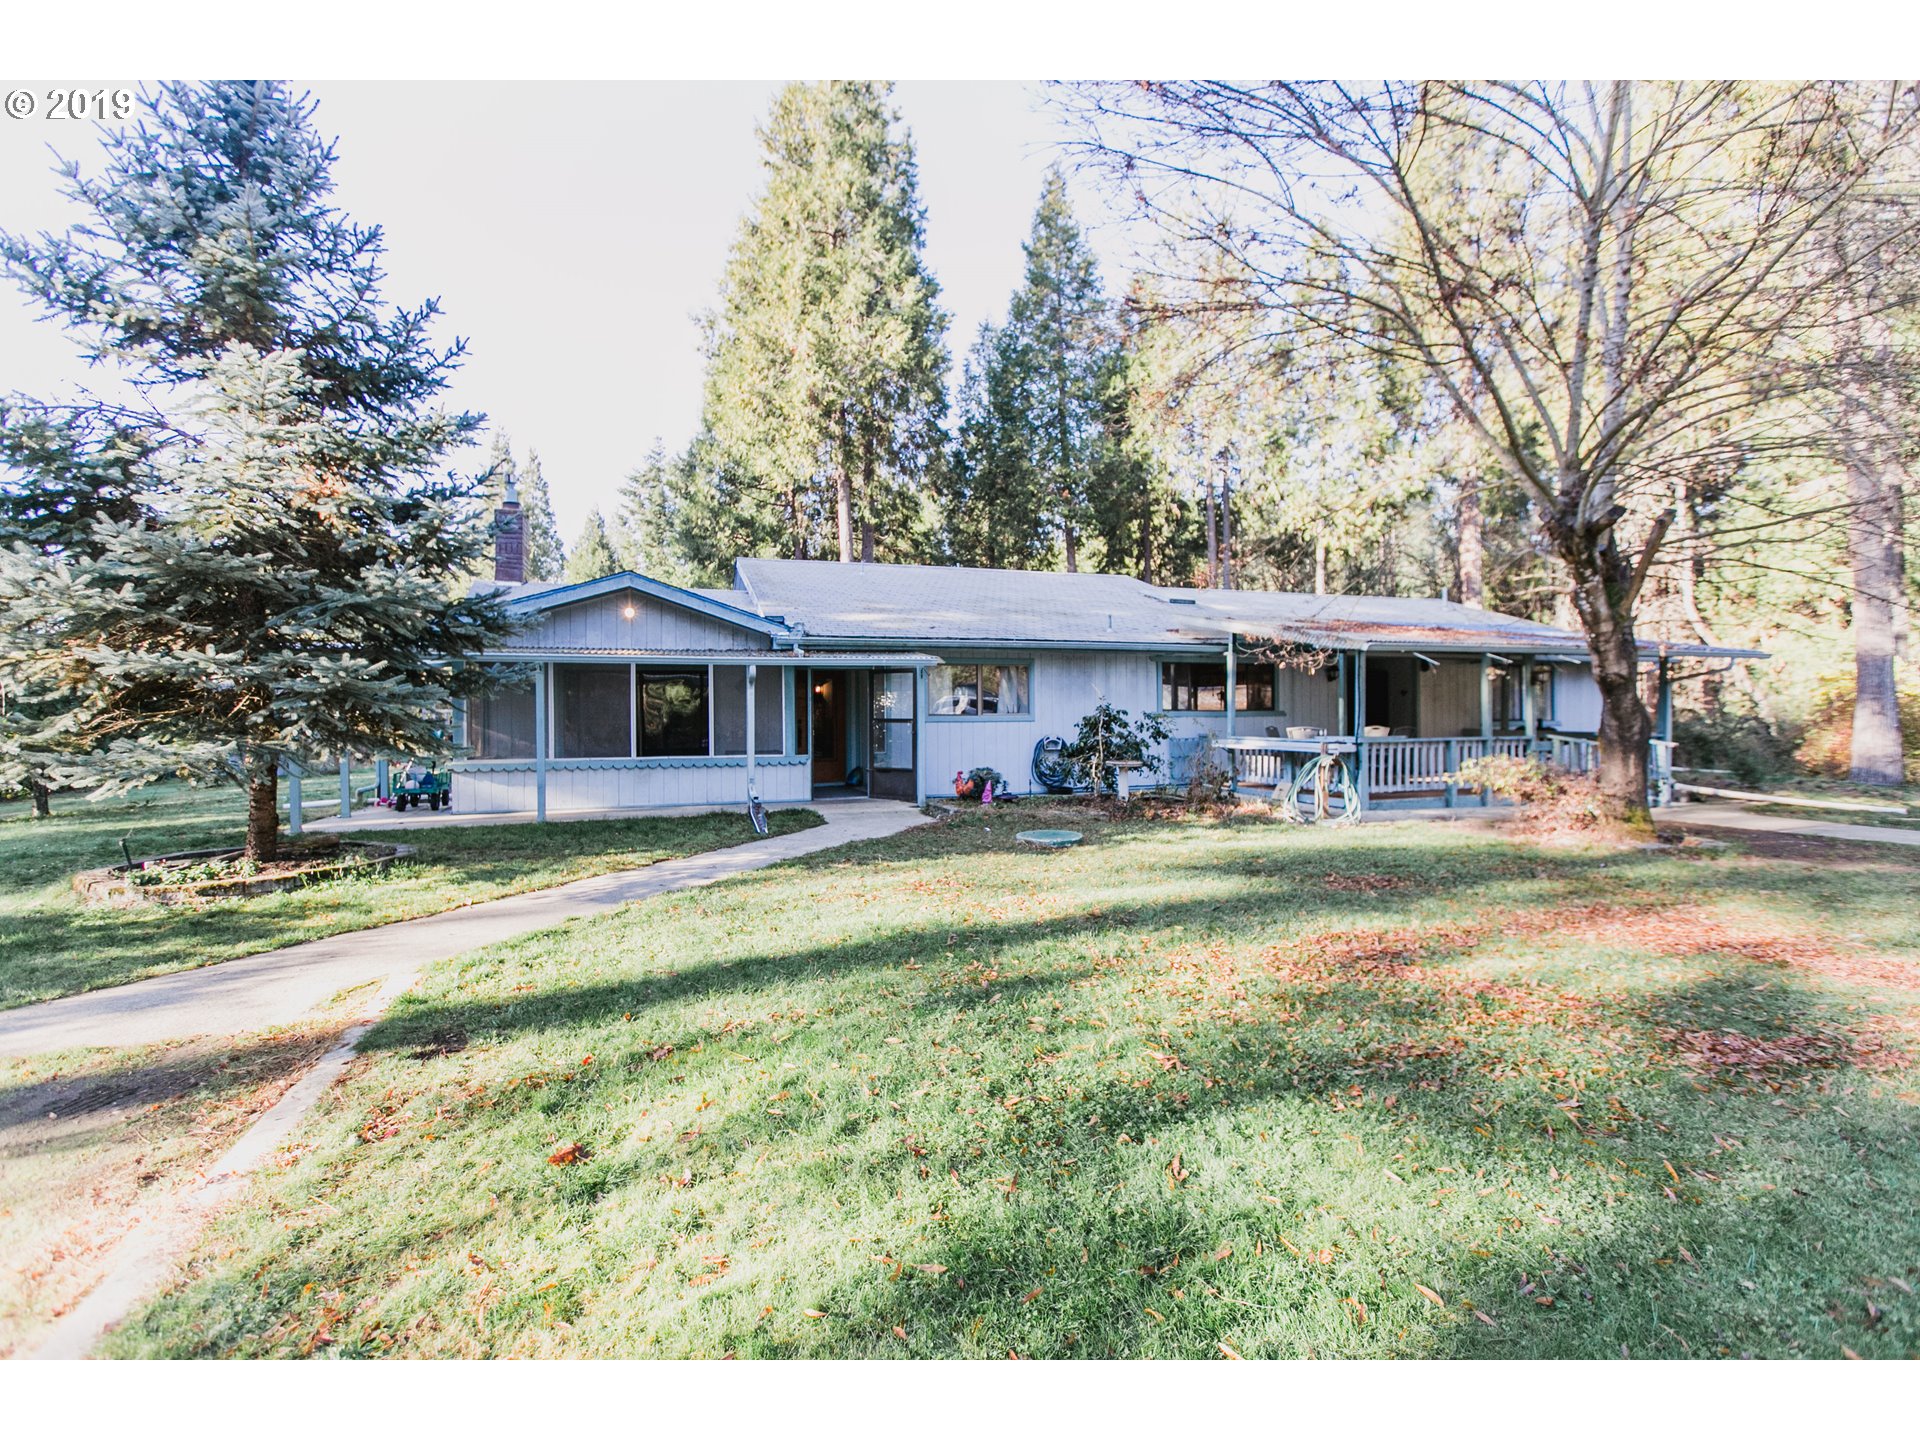 5771 STRICKLAND CANYON RD (1 of 29)